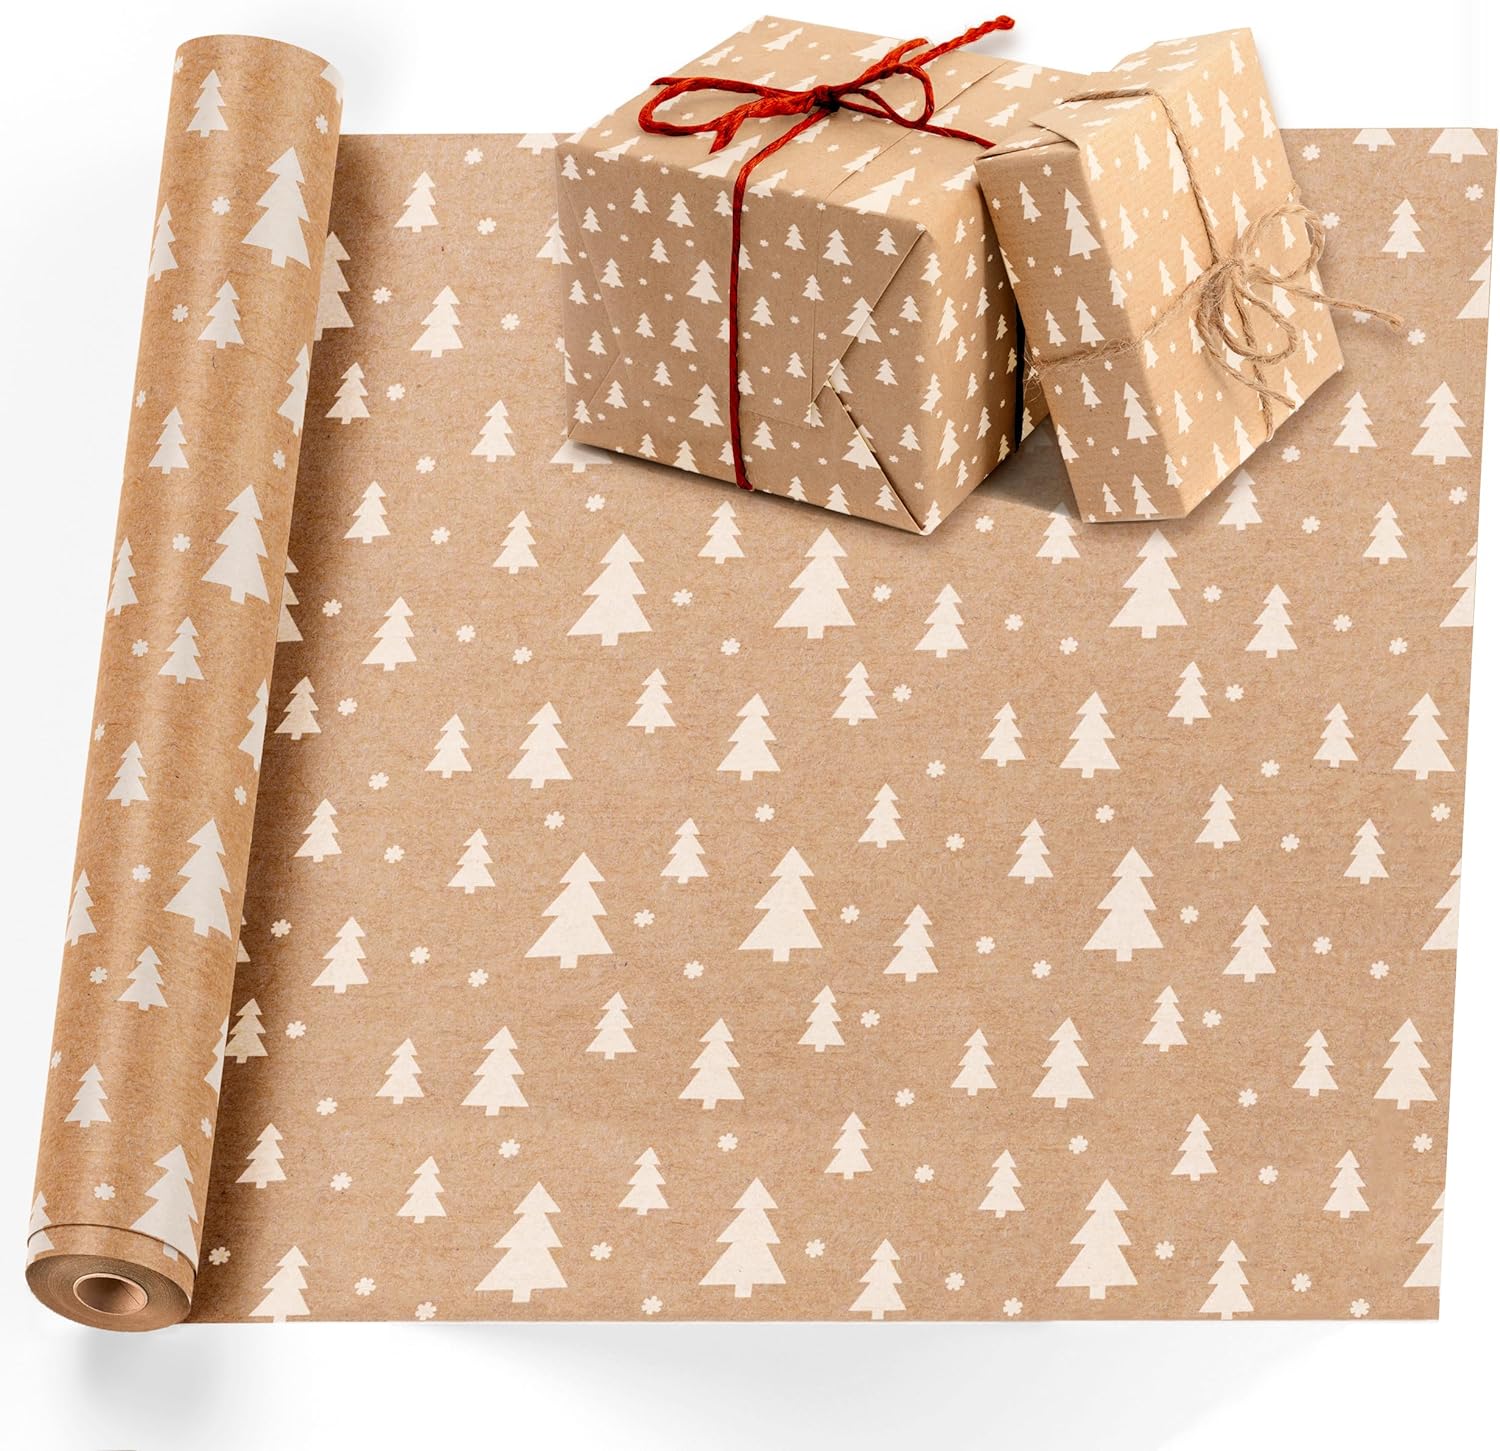 Kraft Wrapping Paper - Premium Gift Wrapping Paper with Strings - Brown Wrapping Paper, Multipurpose Brown Paper Roll, Wrapping Paper Brown for Parcel Packing or Arts & Crafts